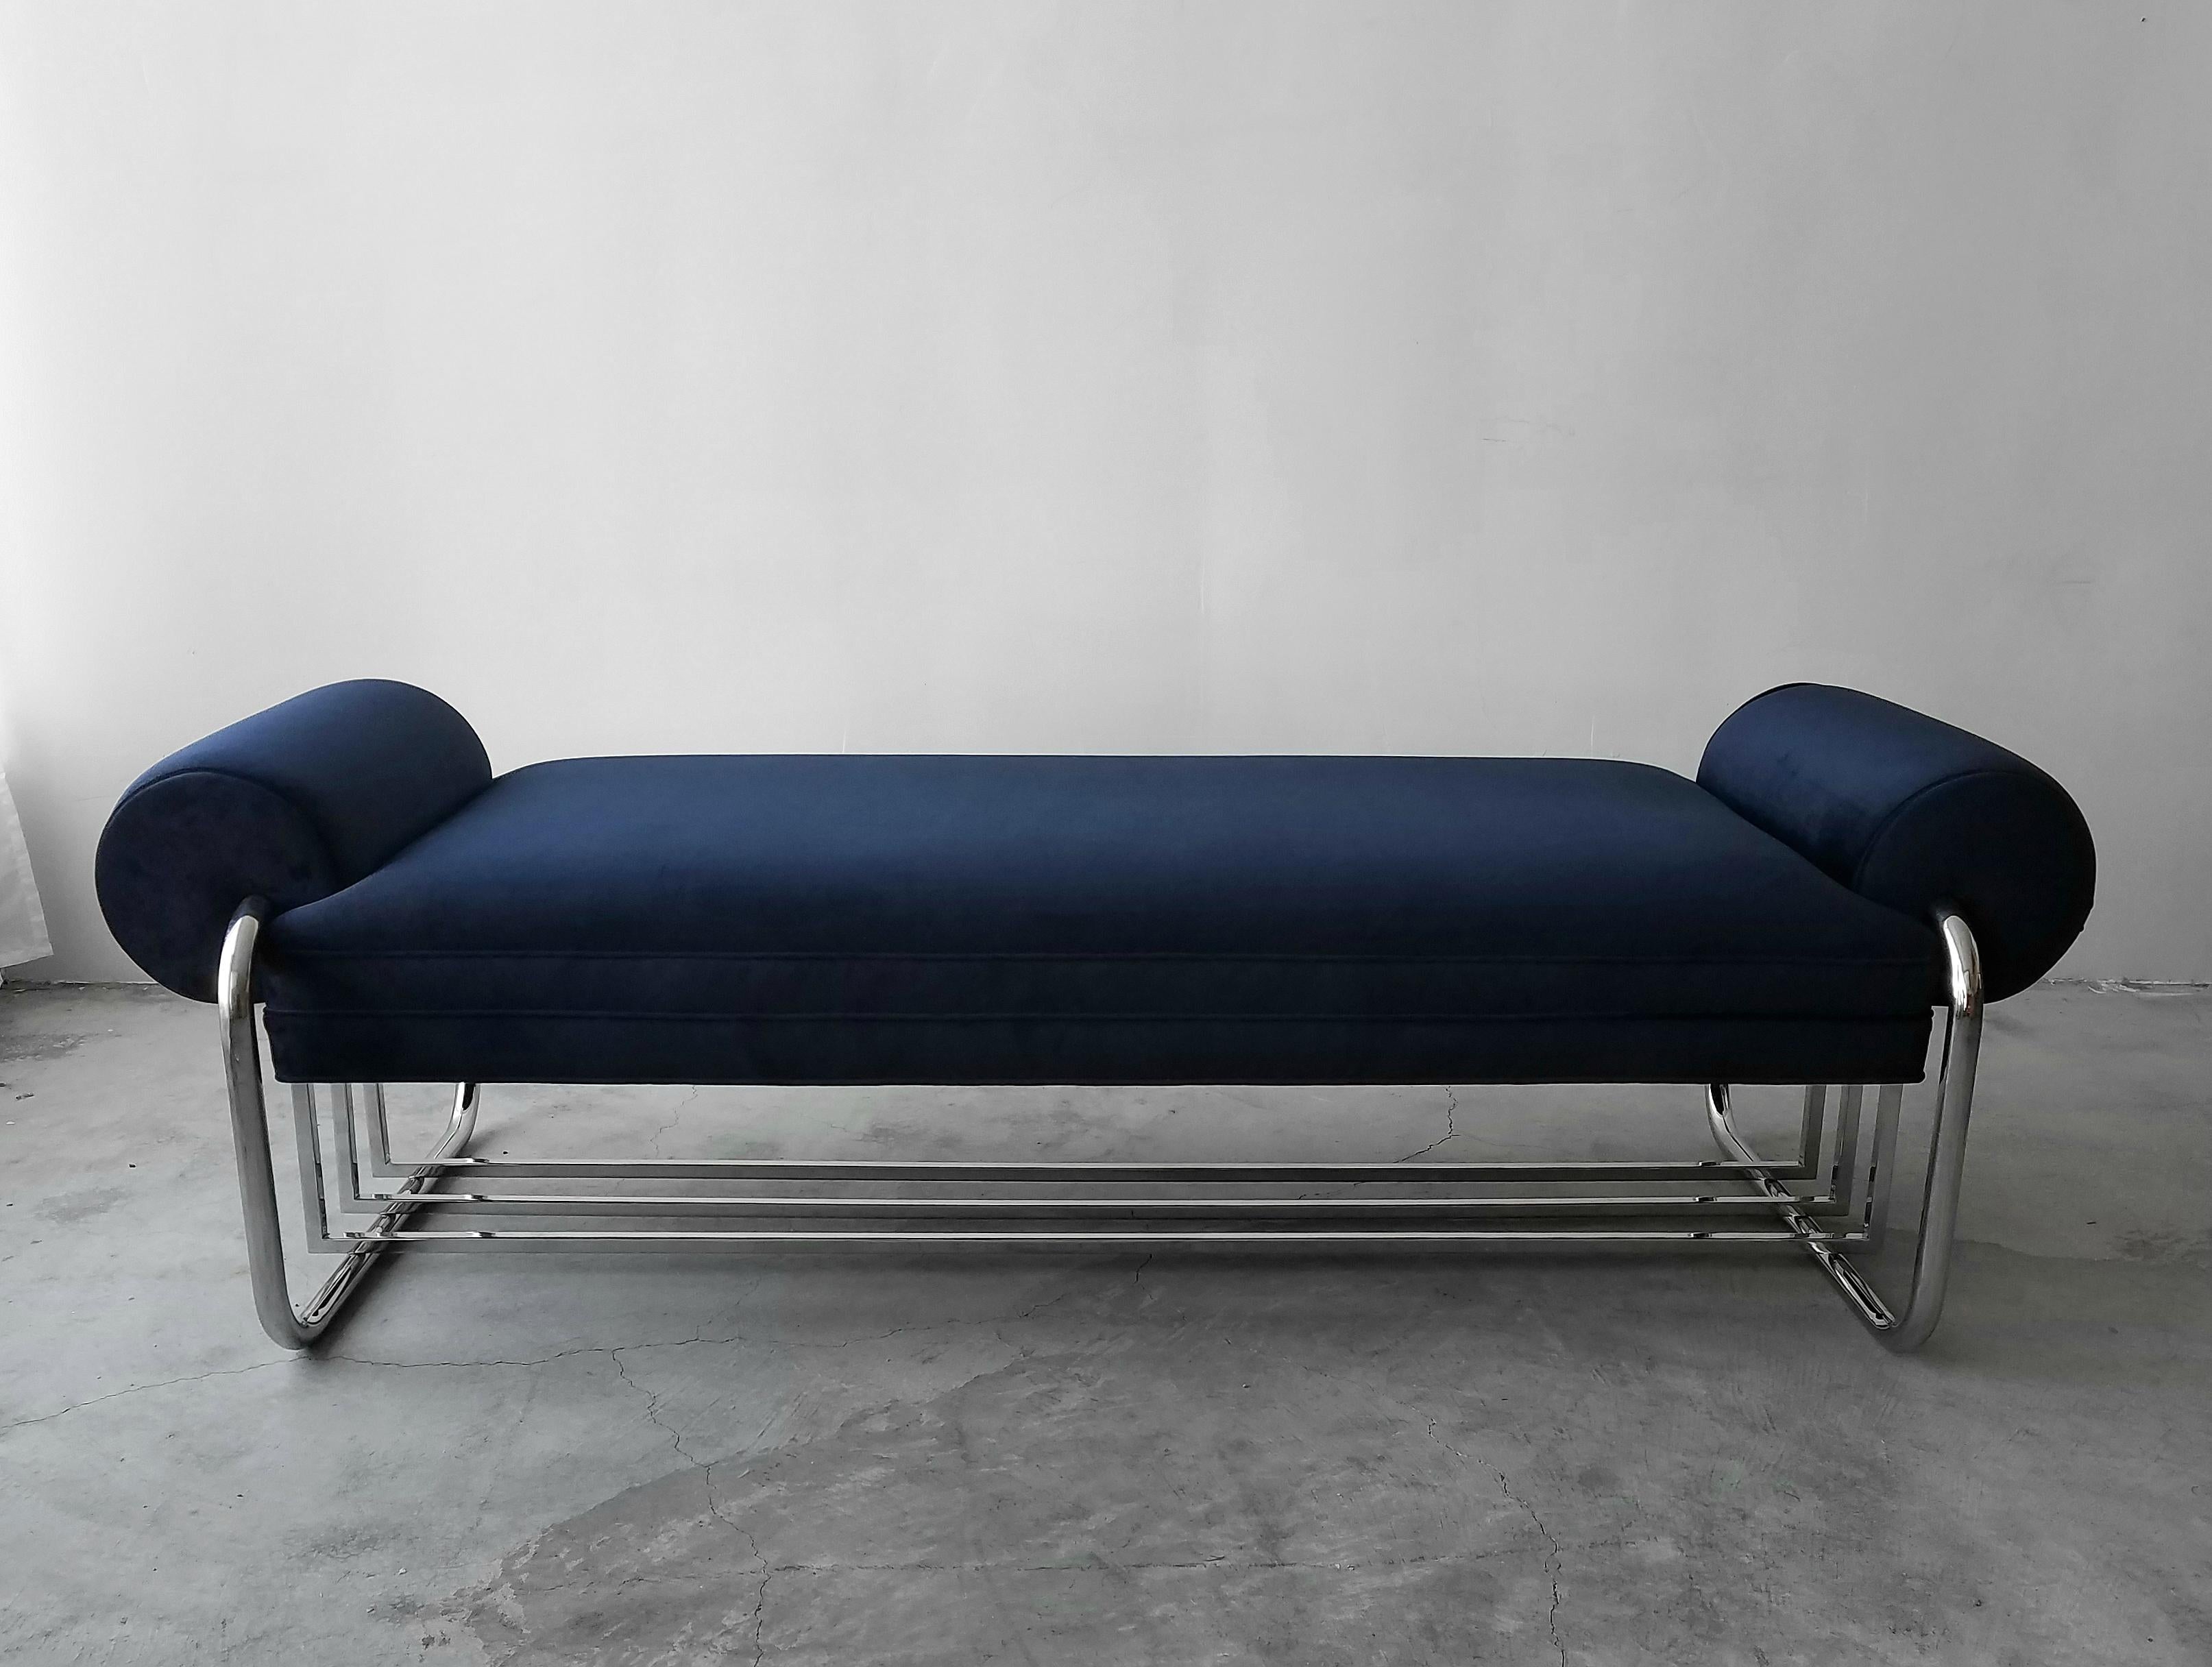 Beautiful Art Deco Machine Age streamline bench by Donald Deskey. Designed in 1934, this piece holds true to how timeless great design truly is. At 6ft in length, it is perfect almost anywhere, entry, foot of a bed or as additional seating in any